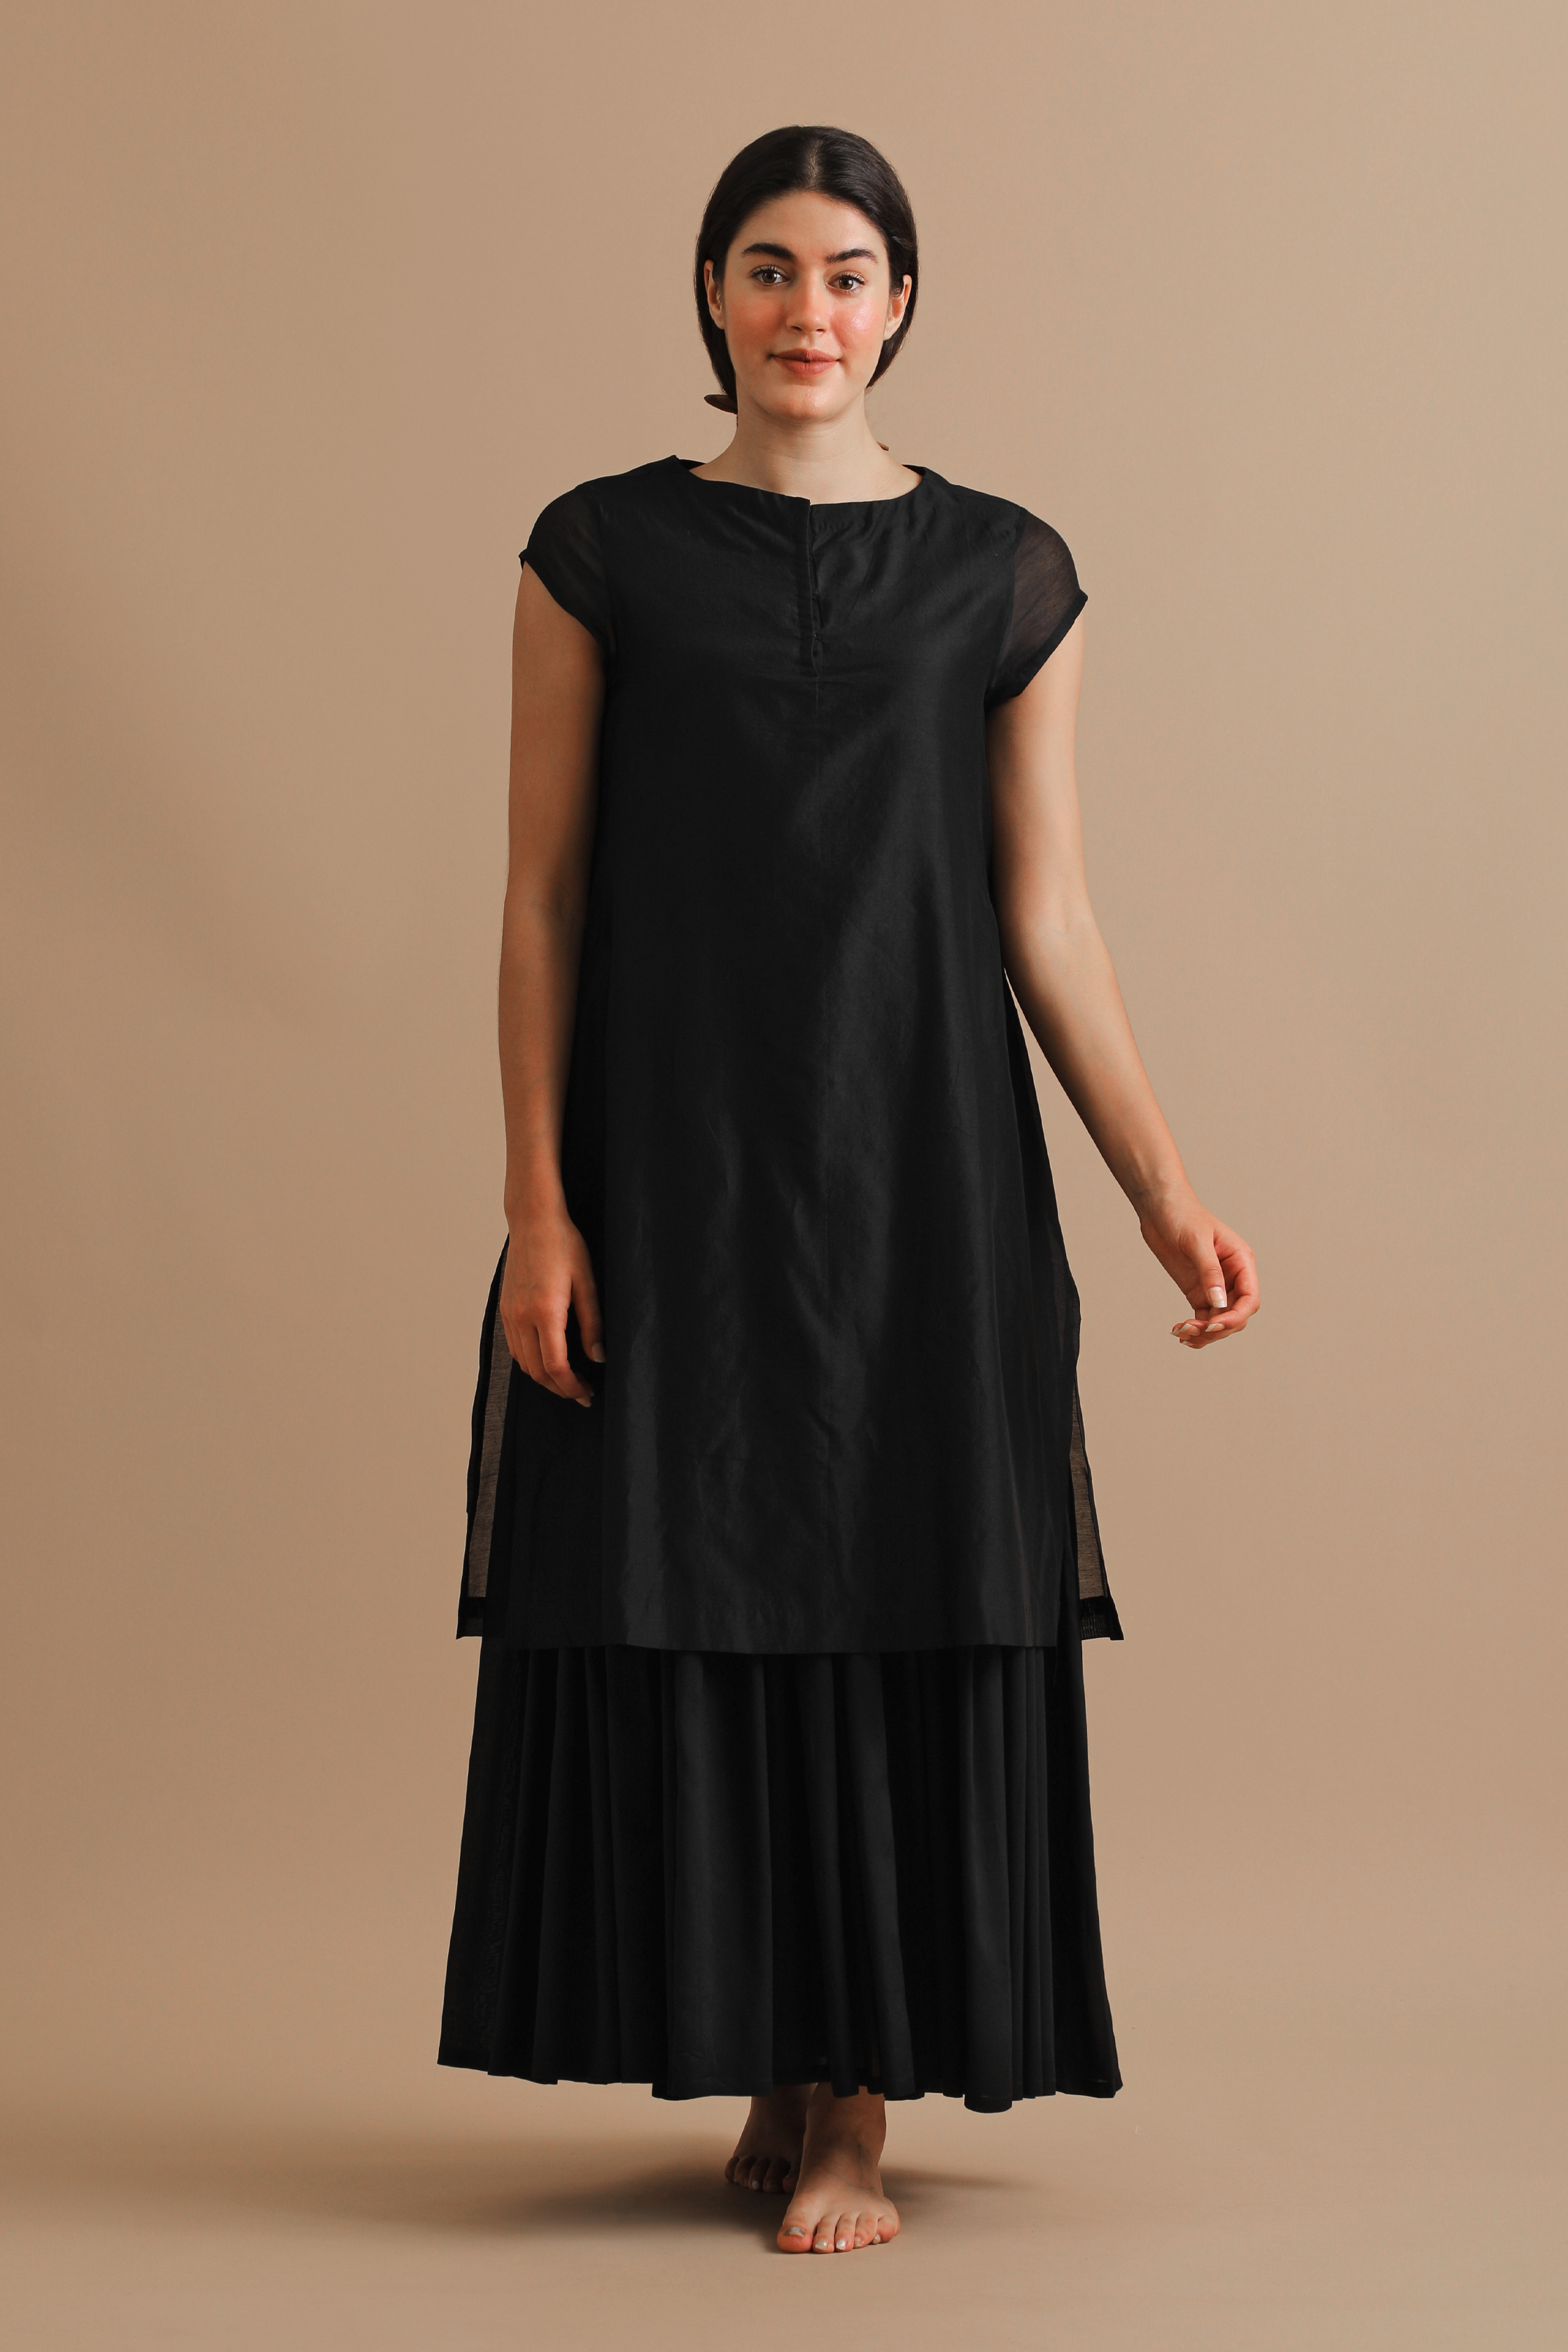 Latest Stylish Black Gowns for Bridesmaids | Simple gowns, Bridesmaid gown,  Stylish dresses